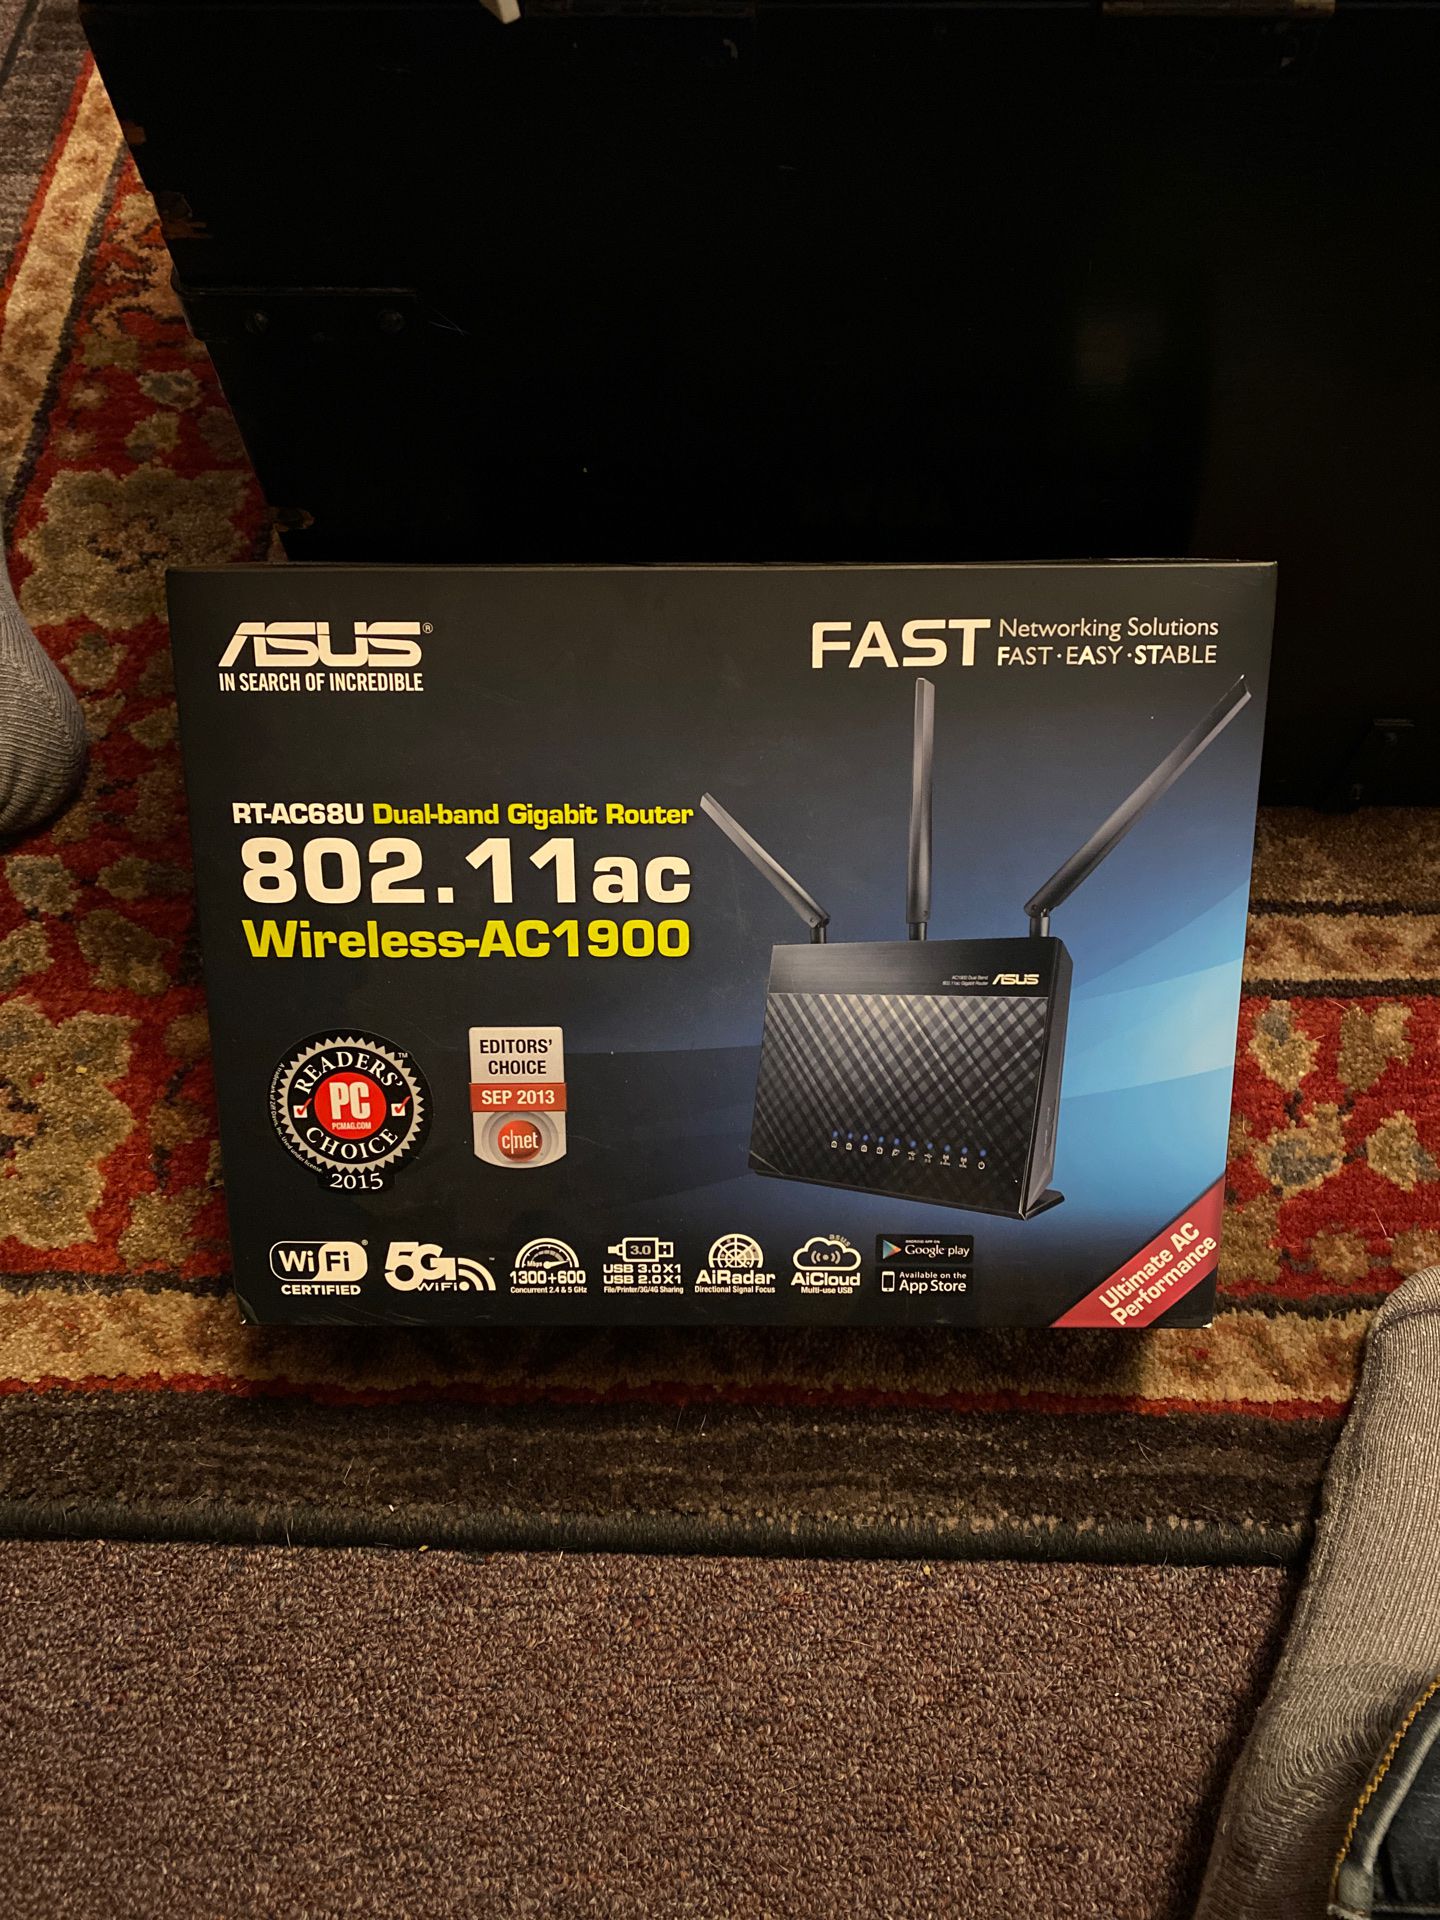 Asus dual-band wireless gig router